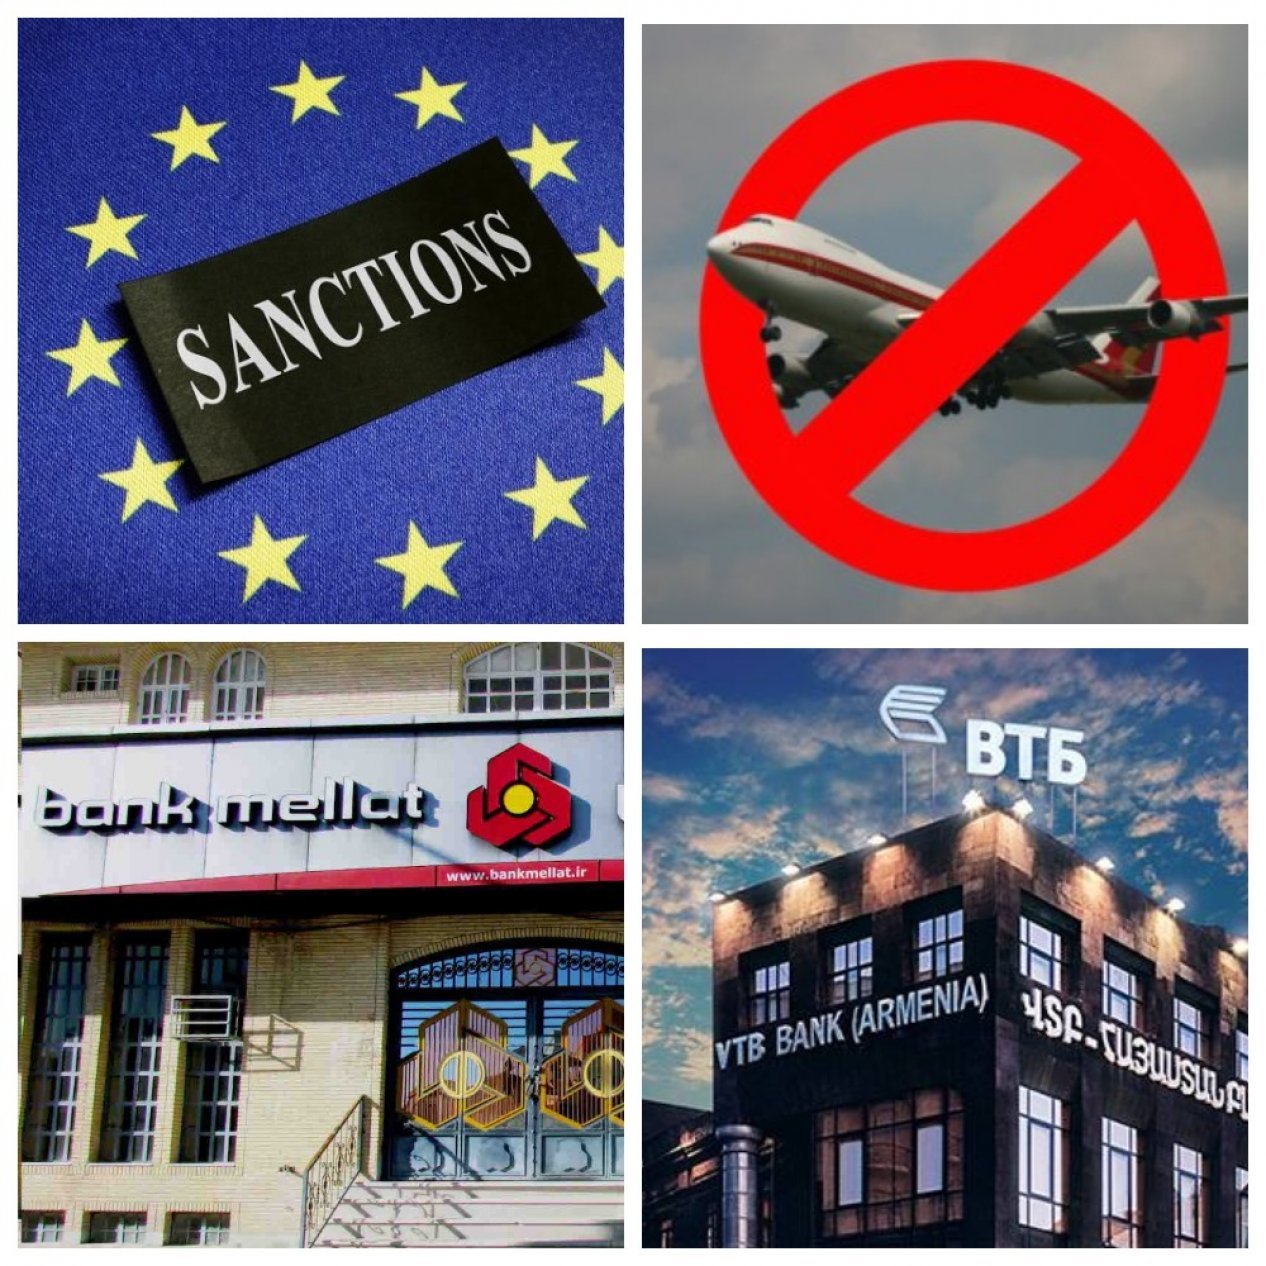 Which Armenian companies involved in transnational crimes were sanctioned? -List